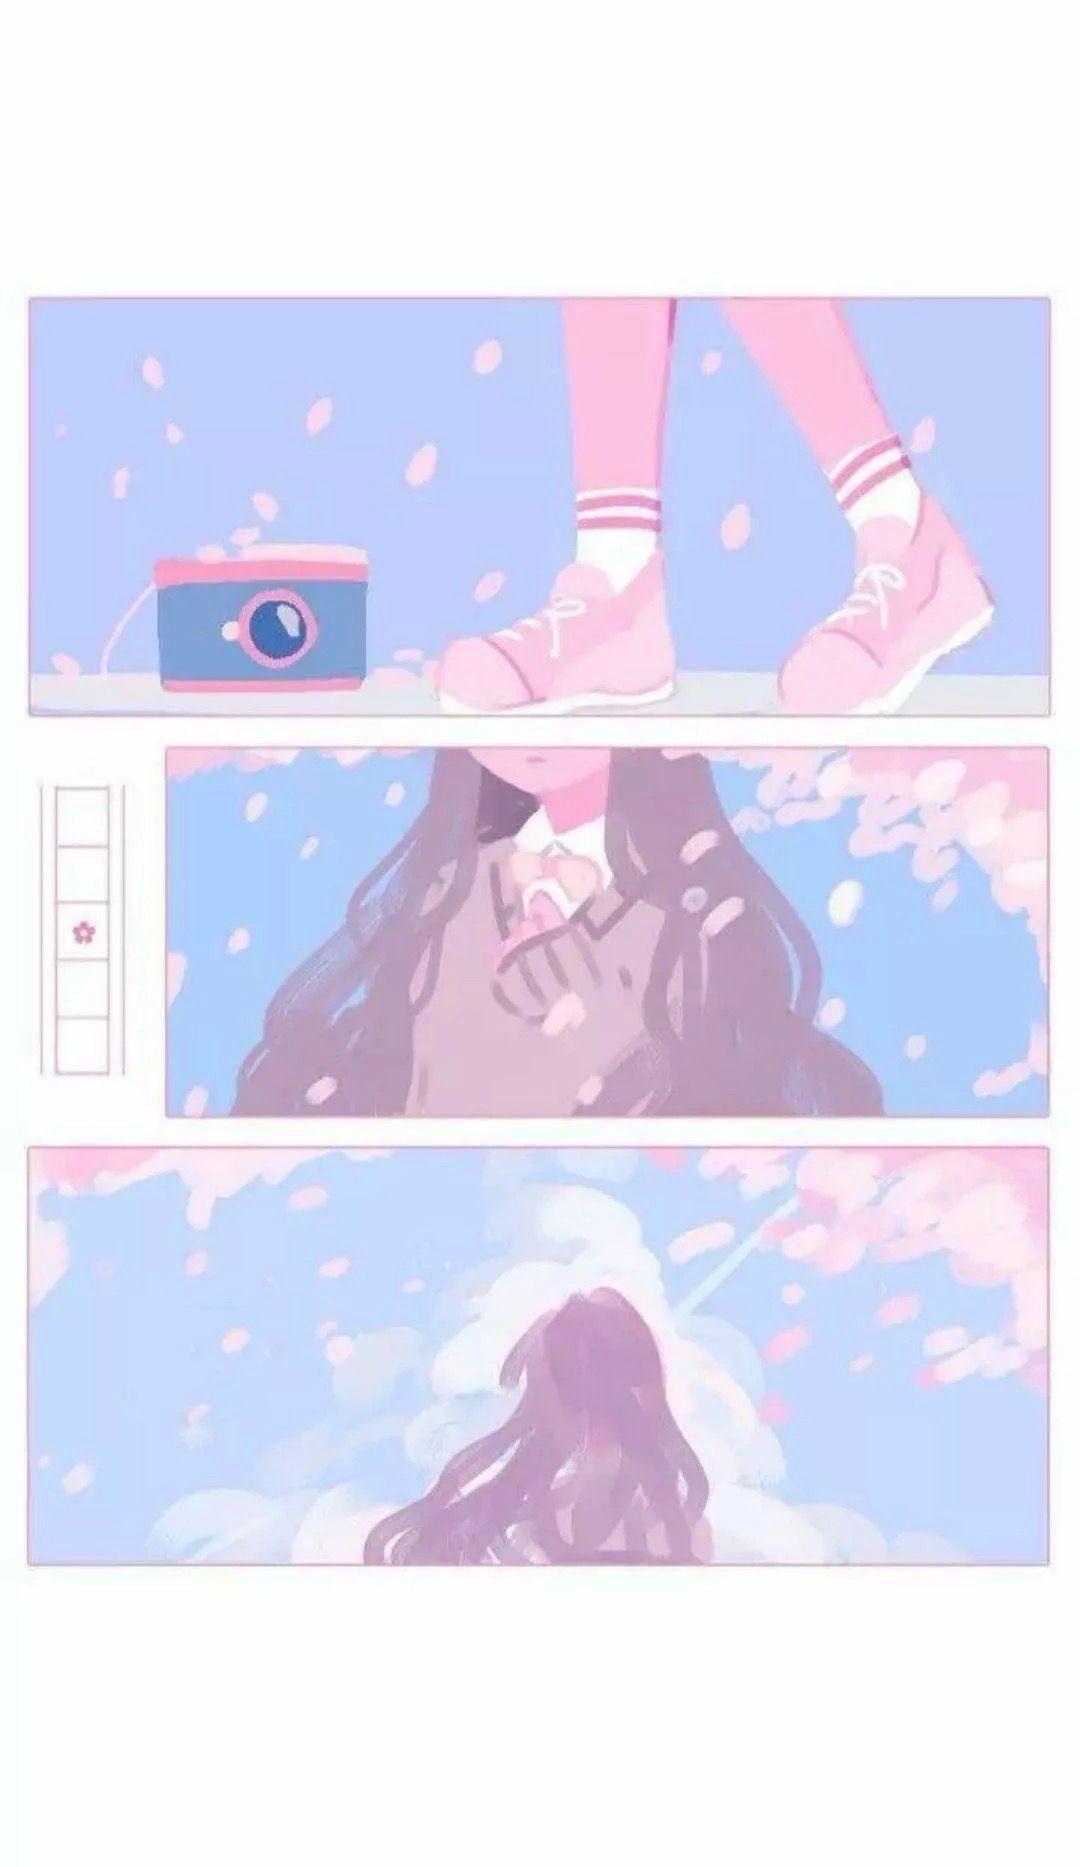 A girl with pink hair and blue shoes is walking through the sky - Pink anime, anime